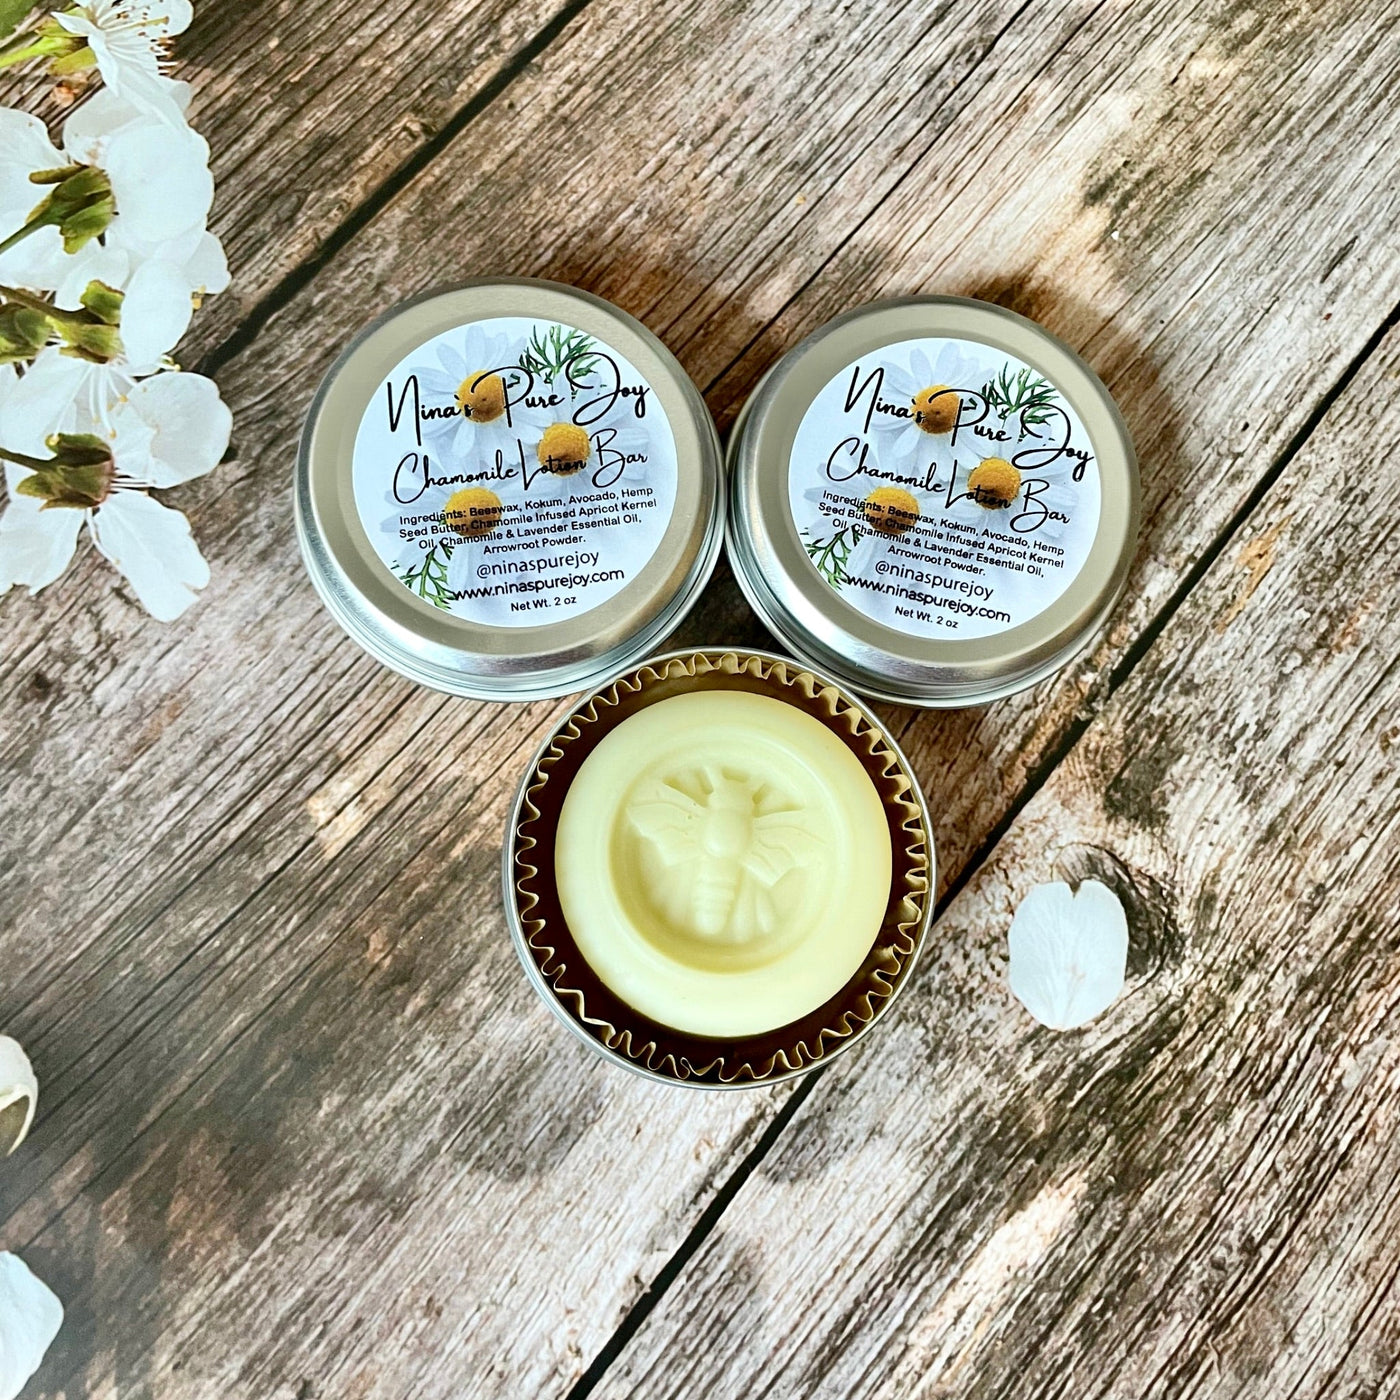 Solid Beeswax & Shea Butter All-Natural Moisturizing Lotion Bar for Eczema Dry Skin - Nina's Pure Joy